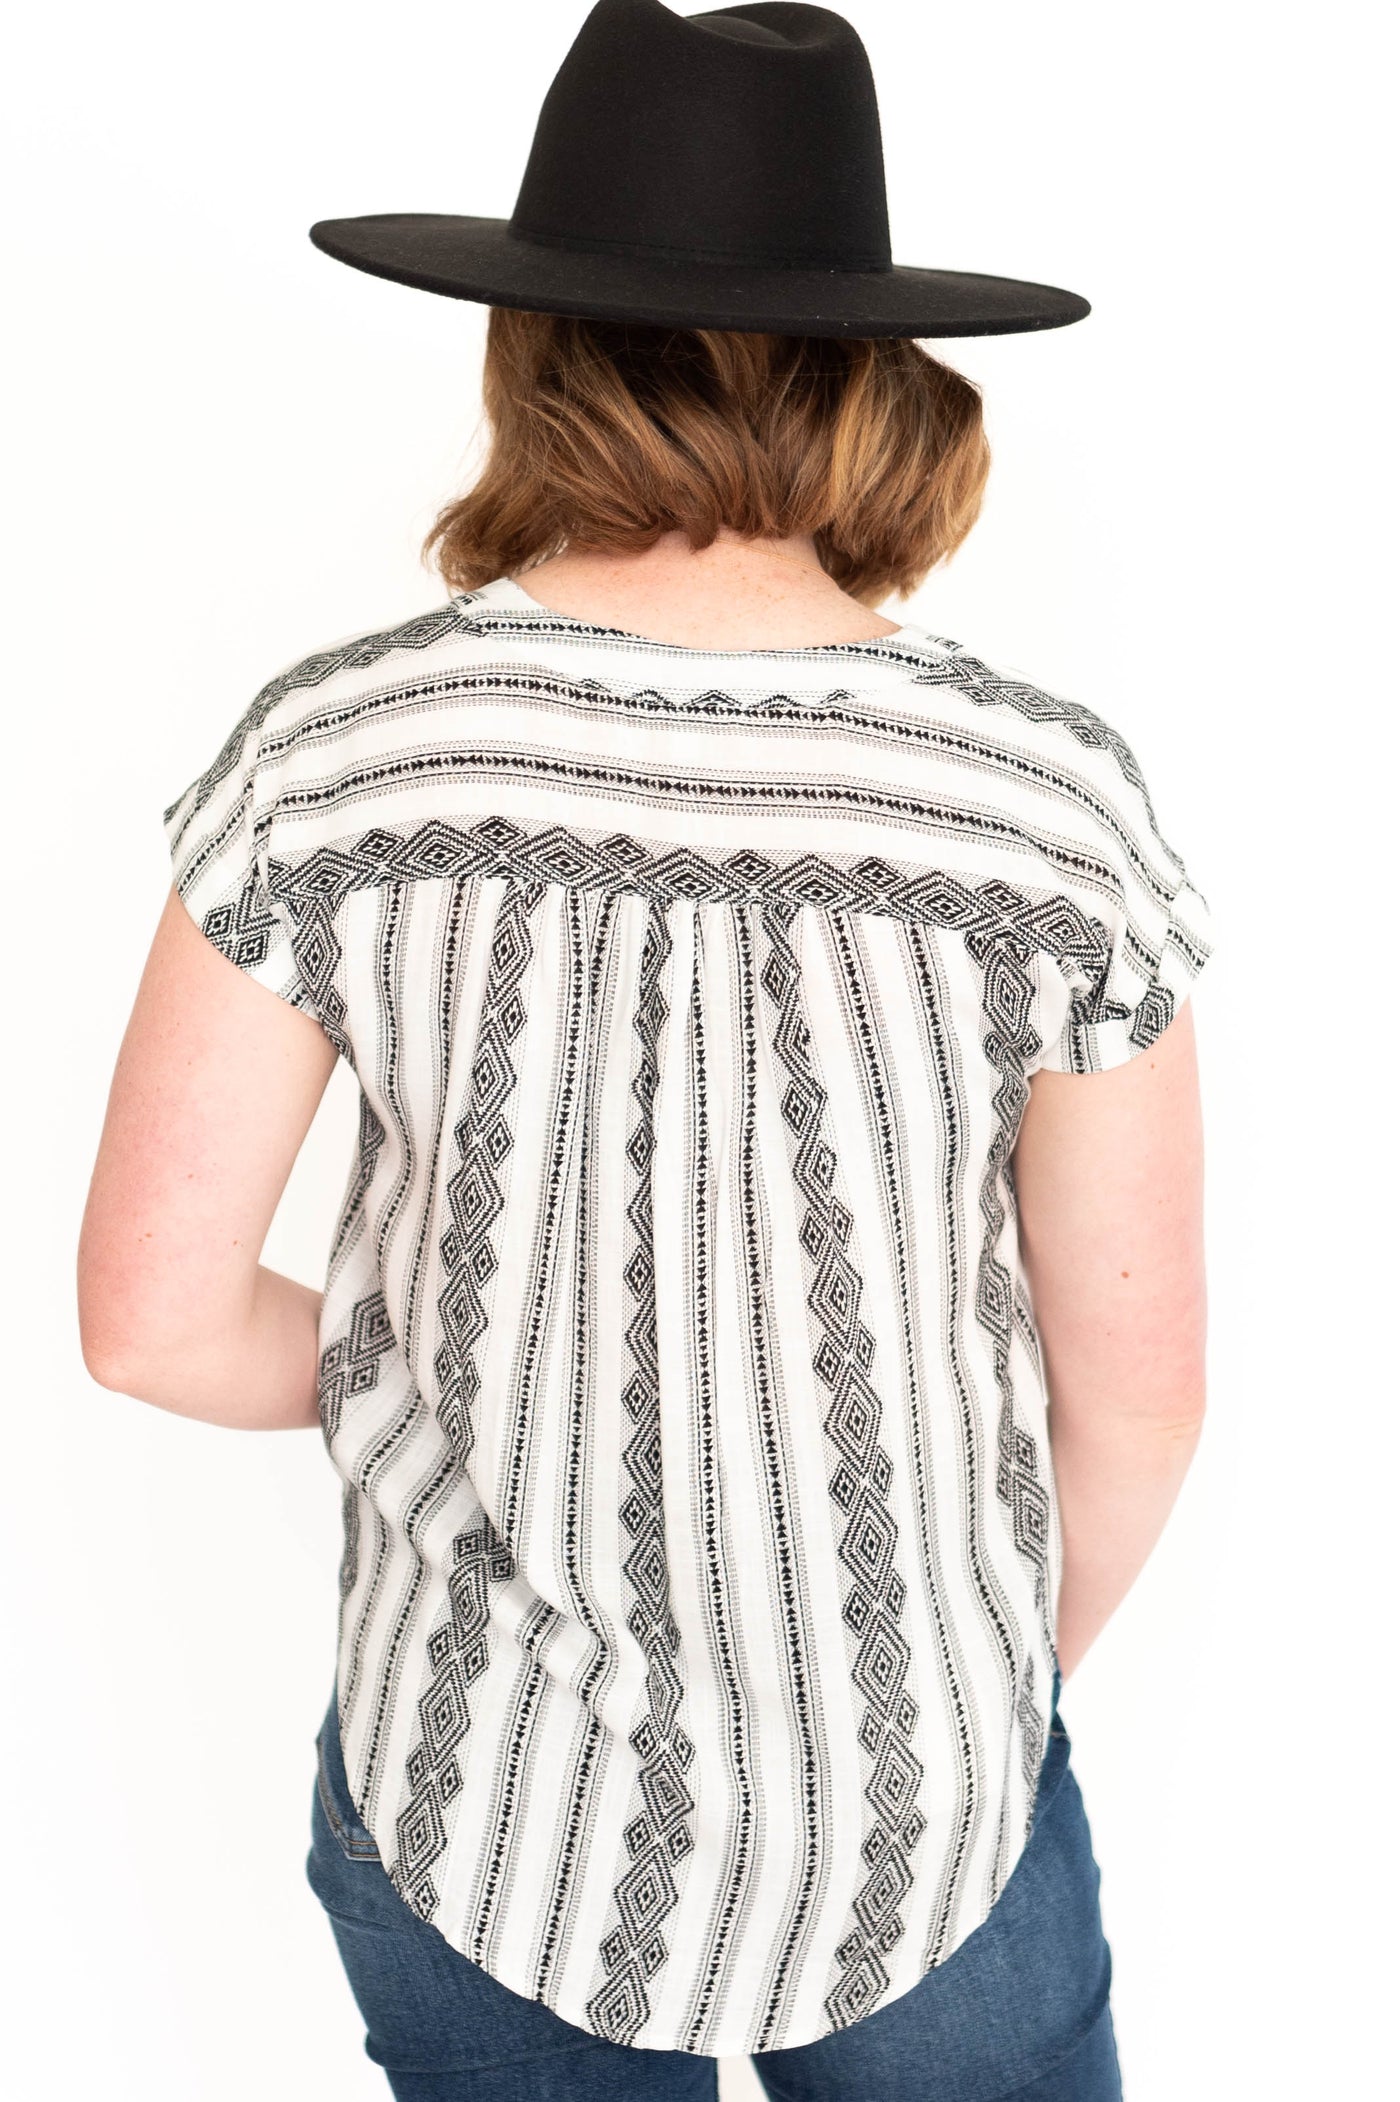 Back view of a short sleeve white top with black pattern